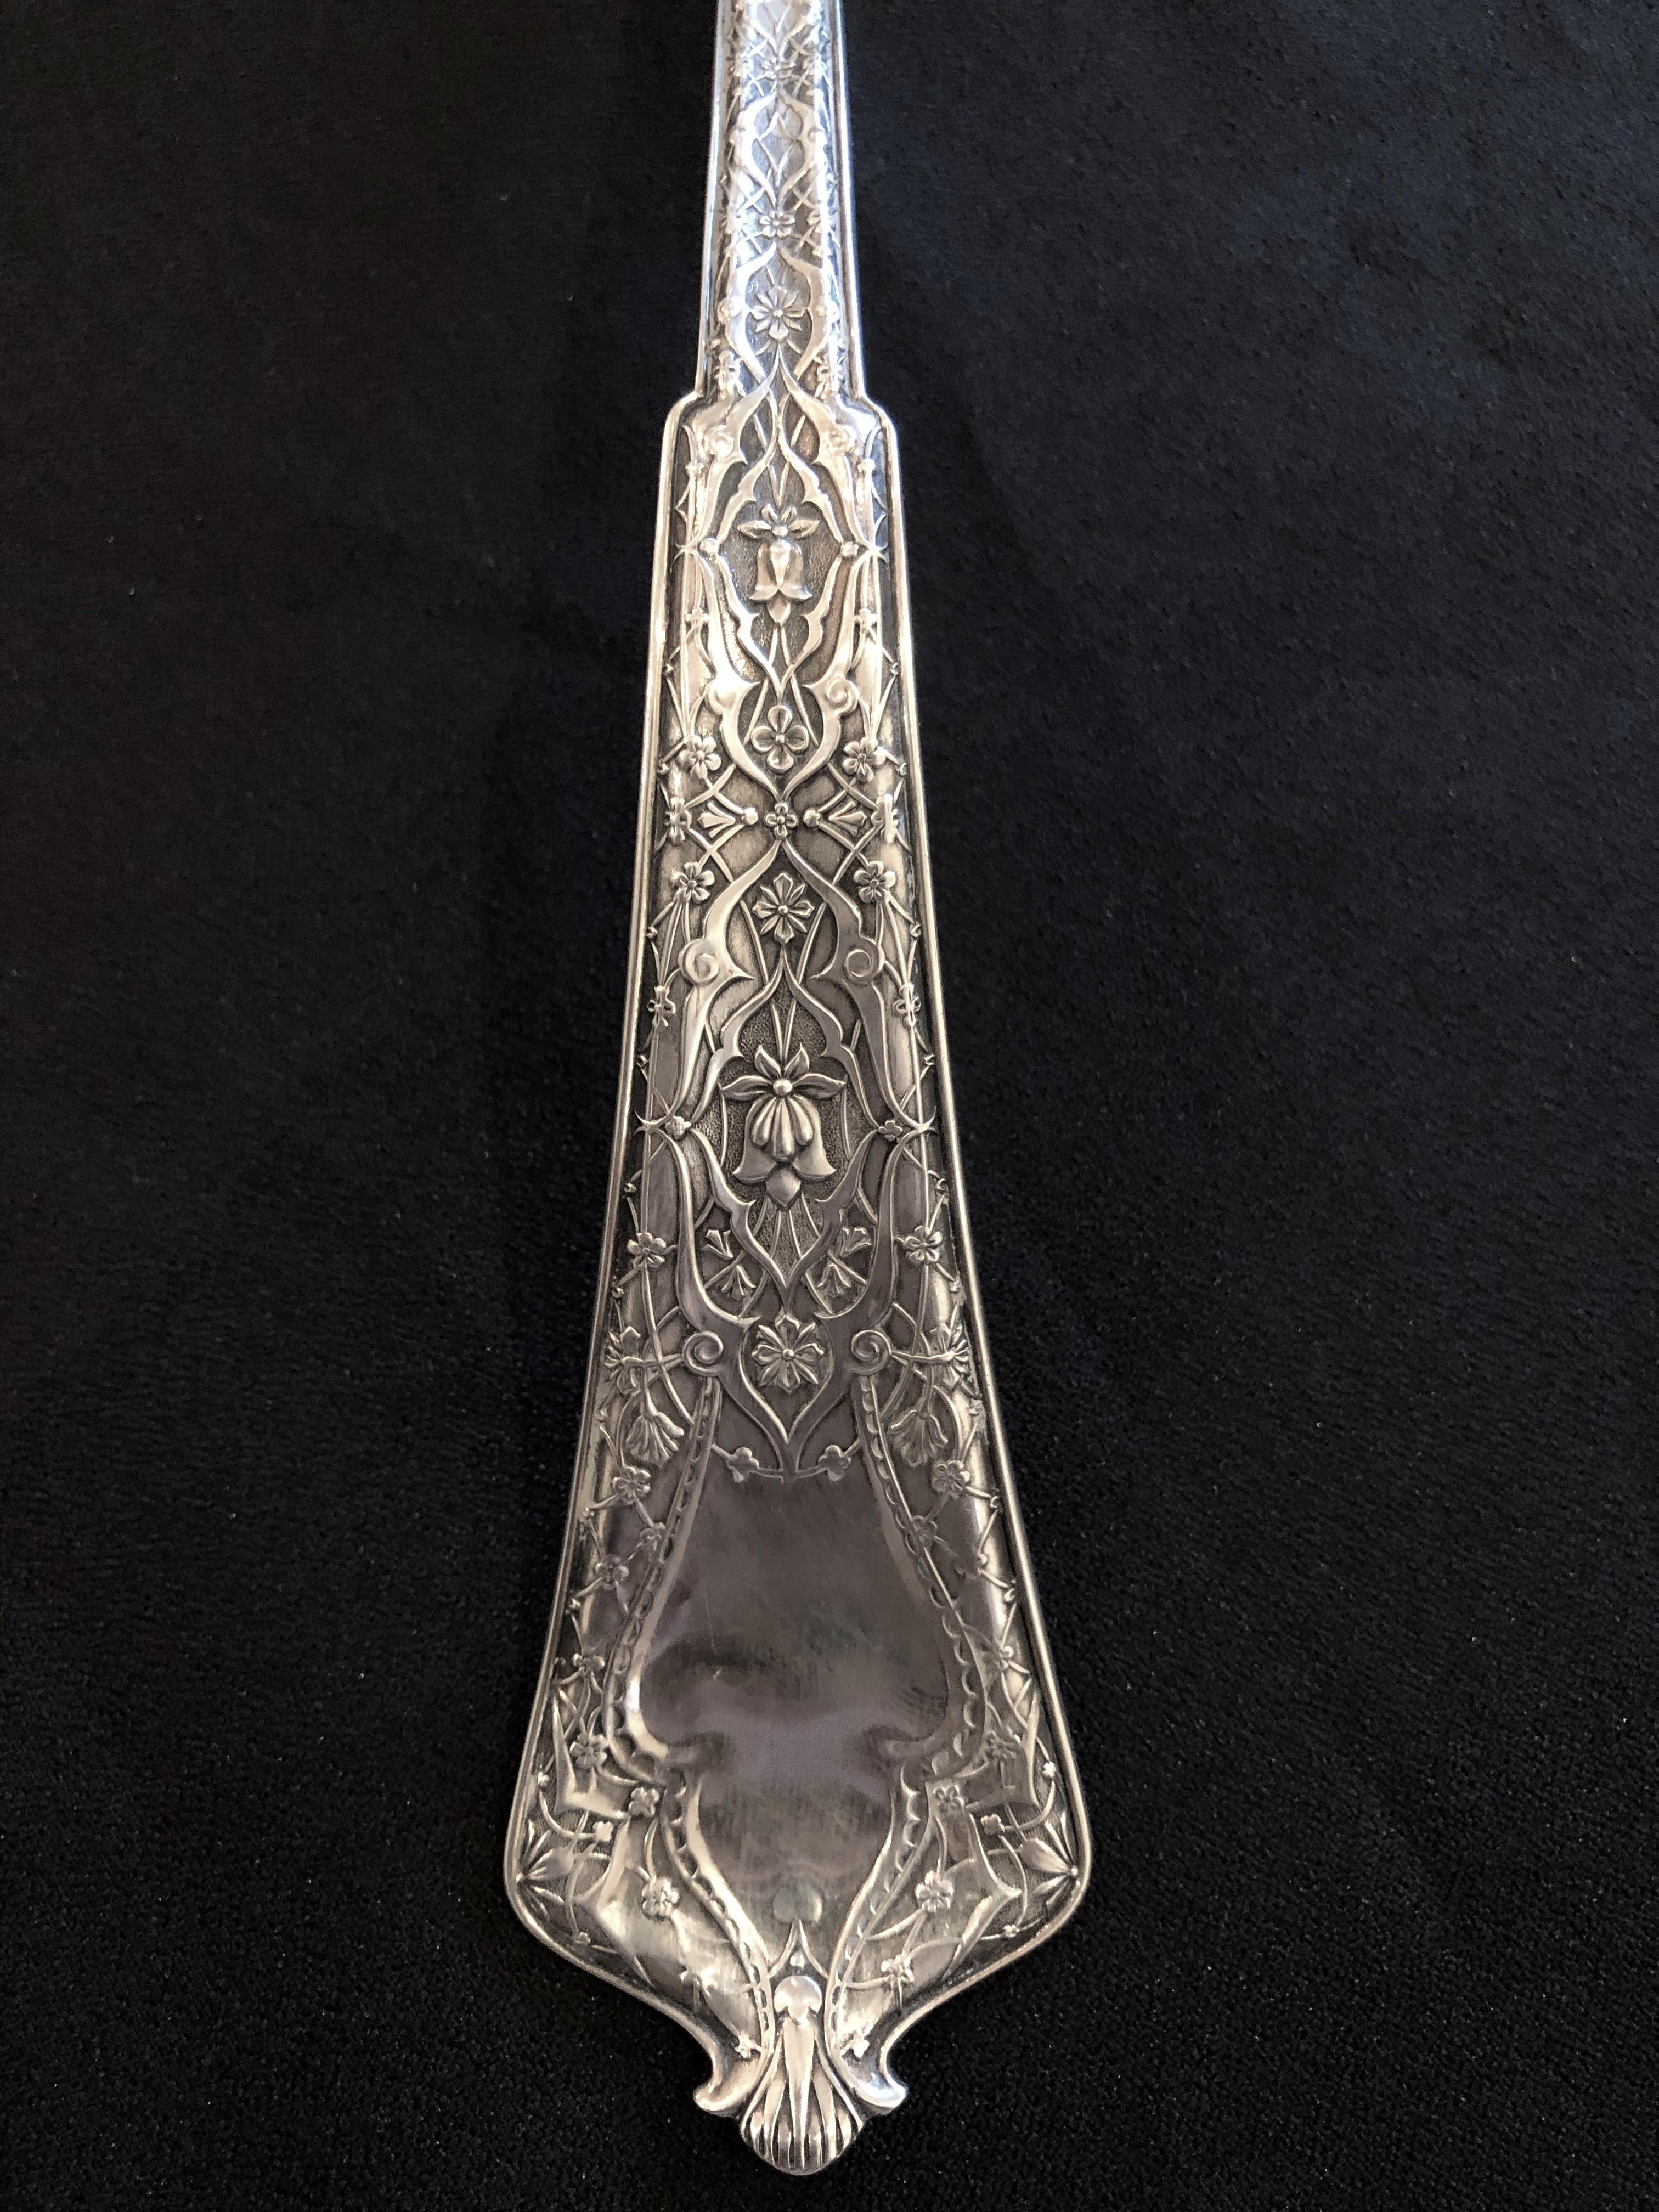 Beautiful large ladle. Tiffany & Company in the Persian pattern.

1872 patent date. Gold washed bowl. Capital M dating the piece between 1875-1891. 

Measures: 12